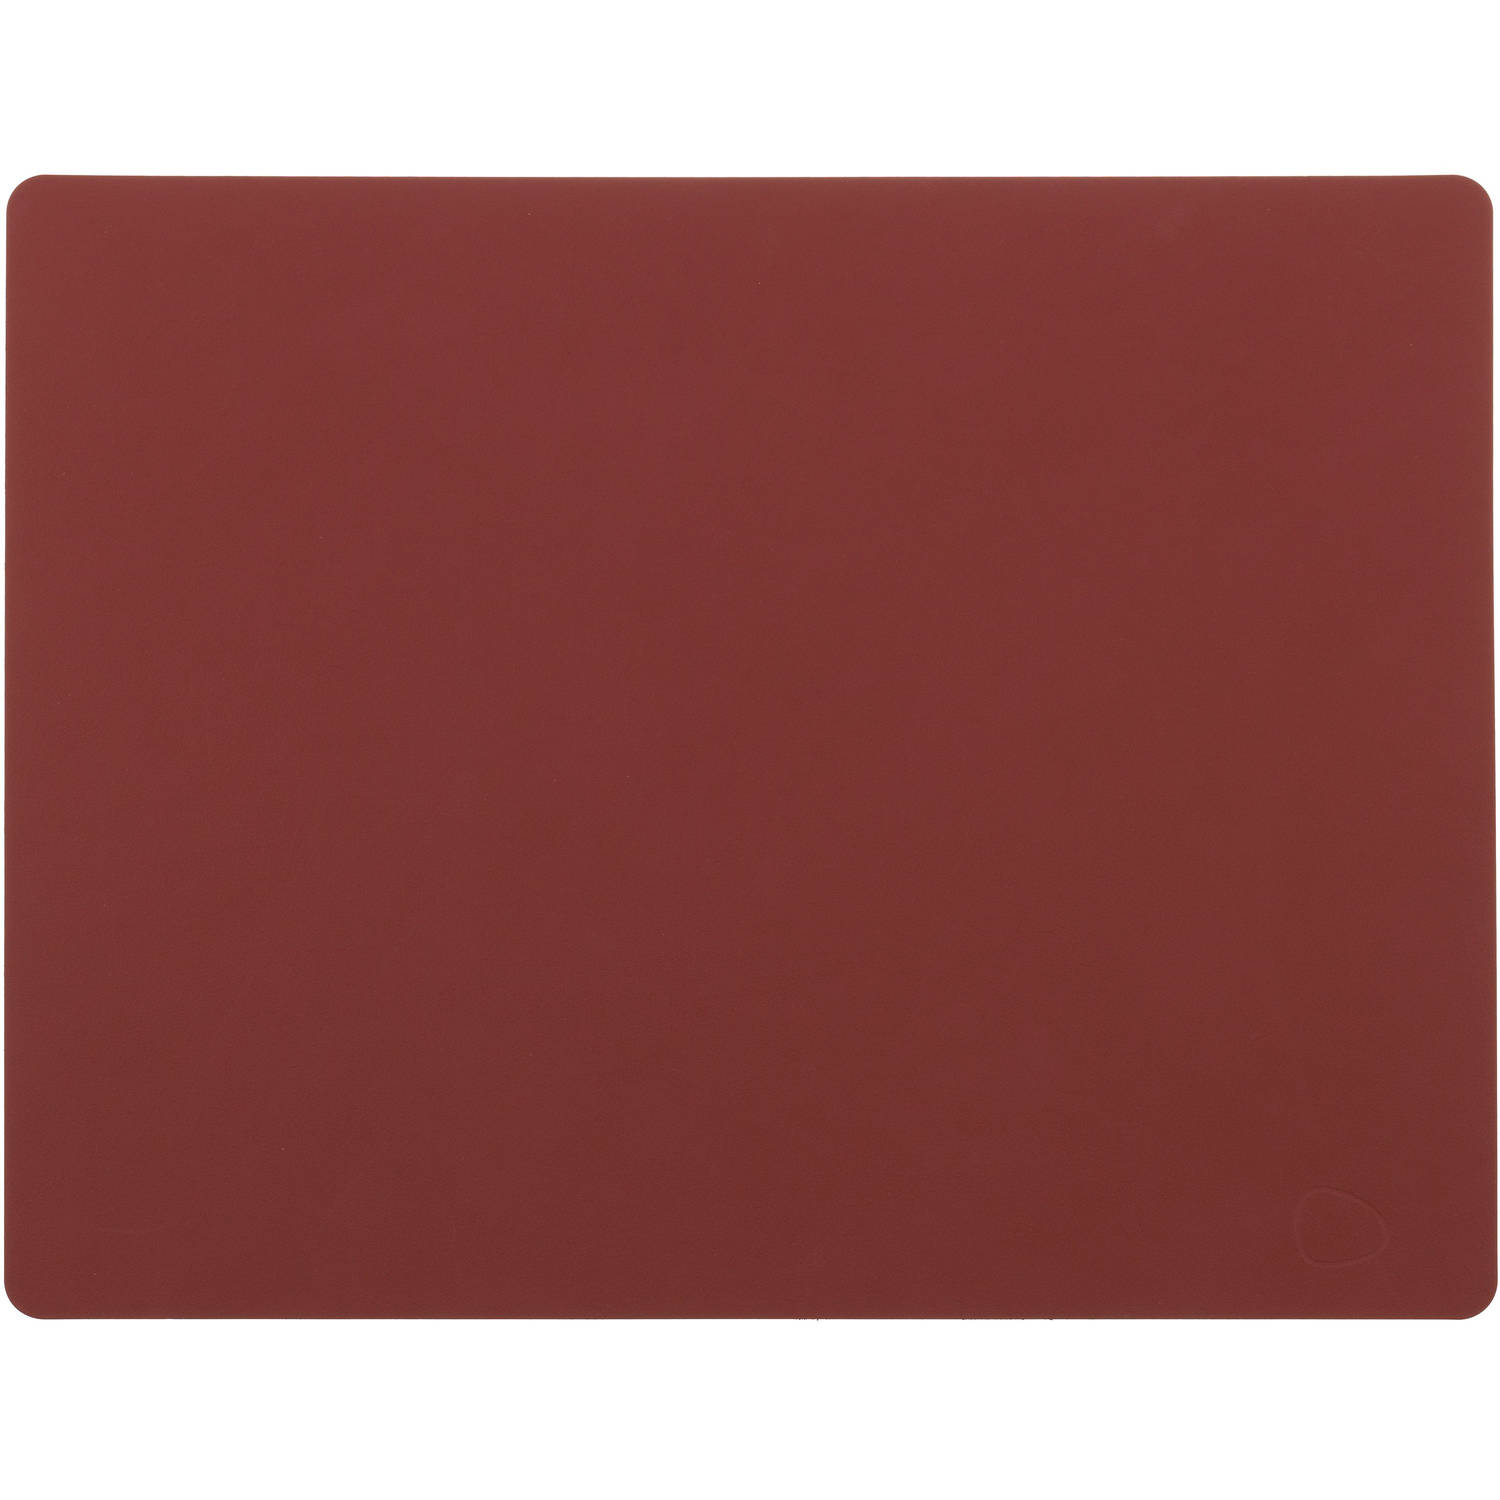 LIND DNA Placemat Nupo - Leer - Red - 45 x 35 cm